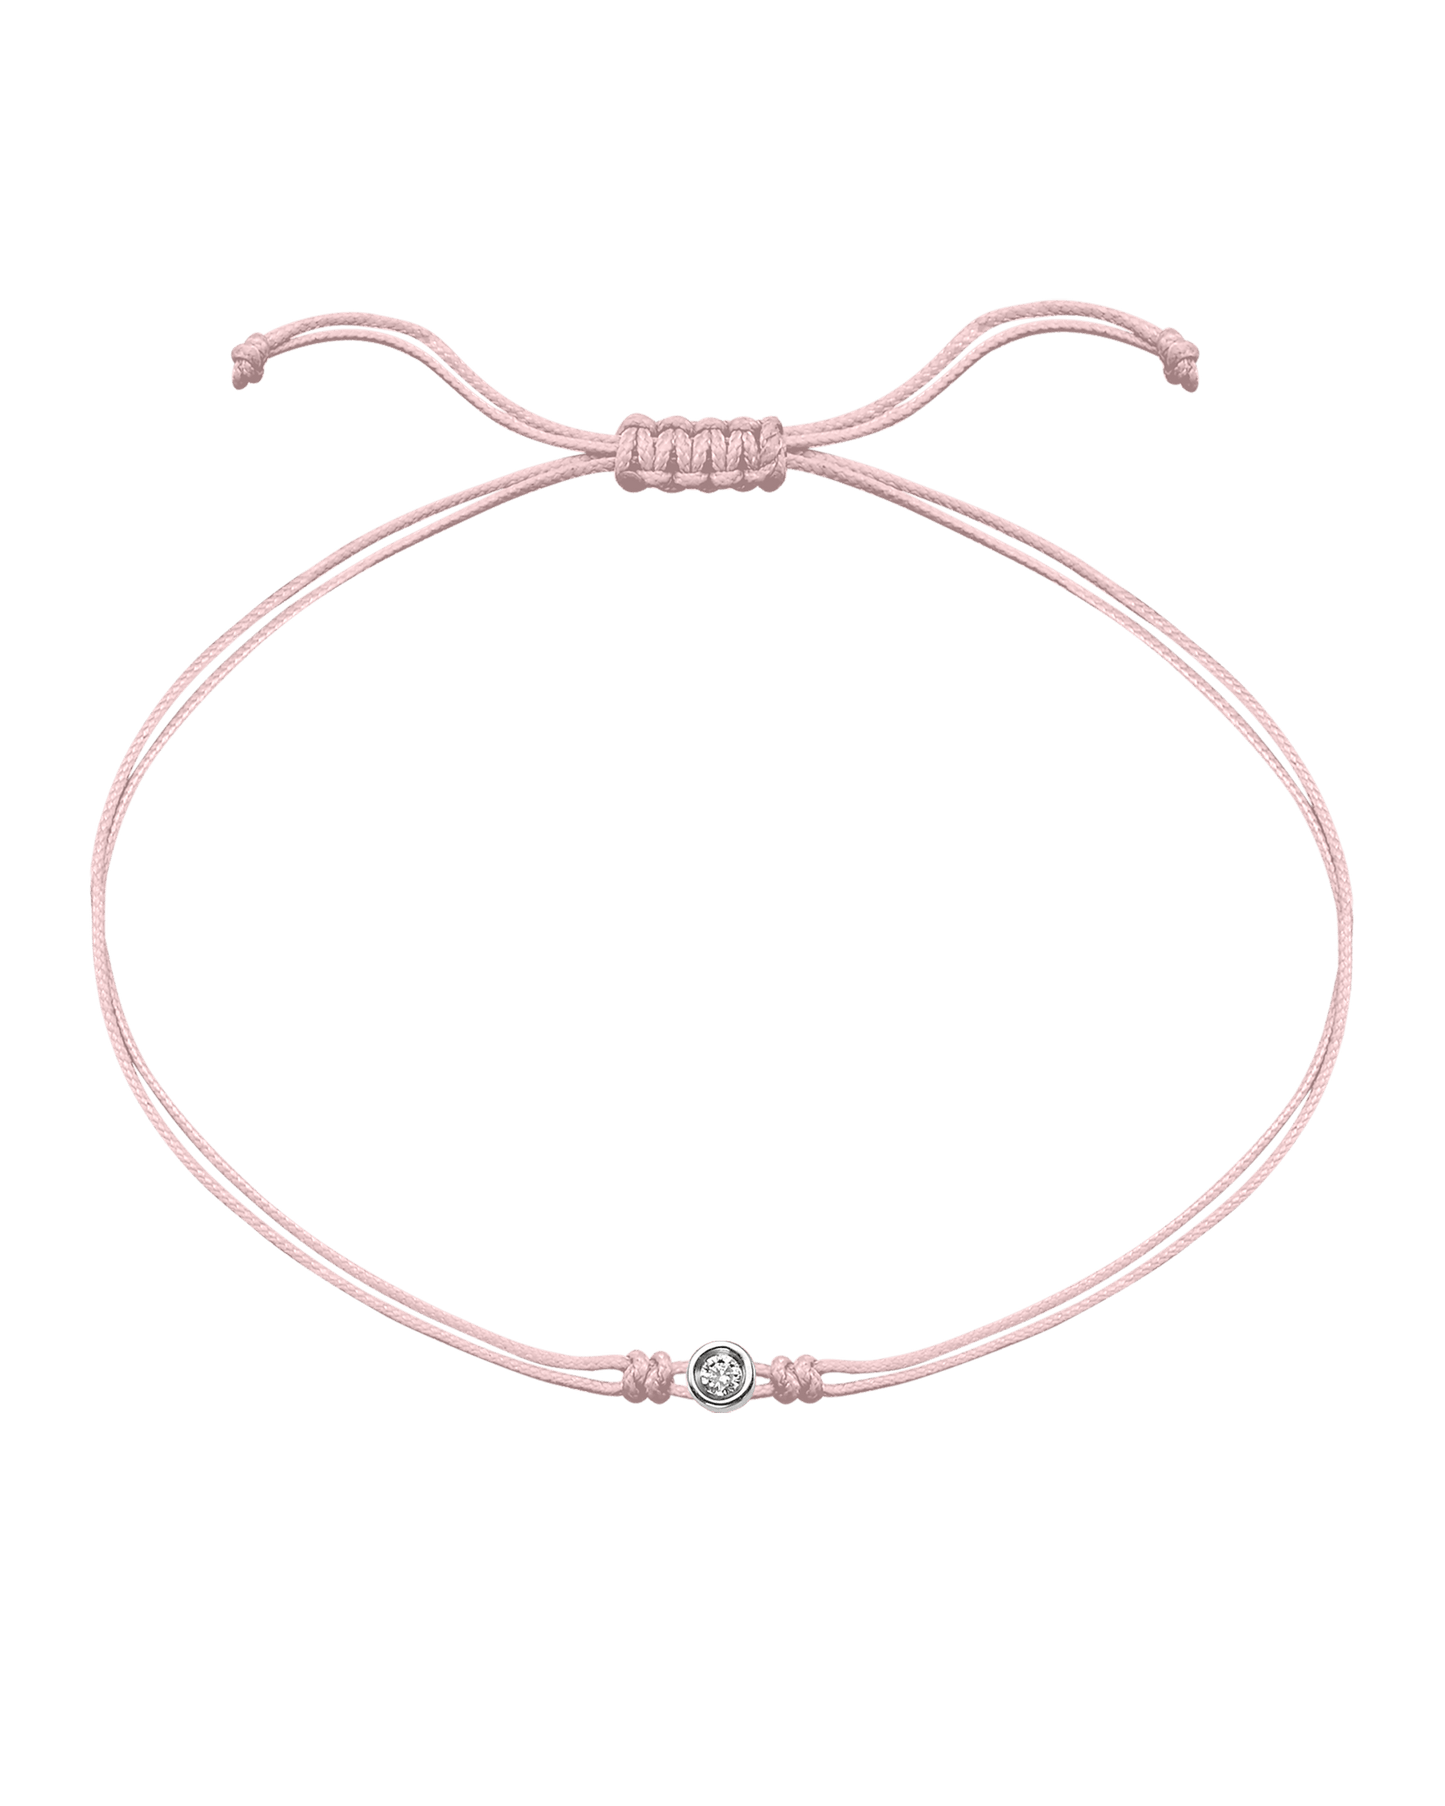 Summer Edition : The Classic String of Love - 14K White Gold Bracelets magal-dev Strawberry Bellini - Light Pink Small: 0.03ct 